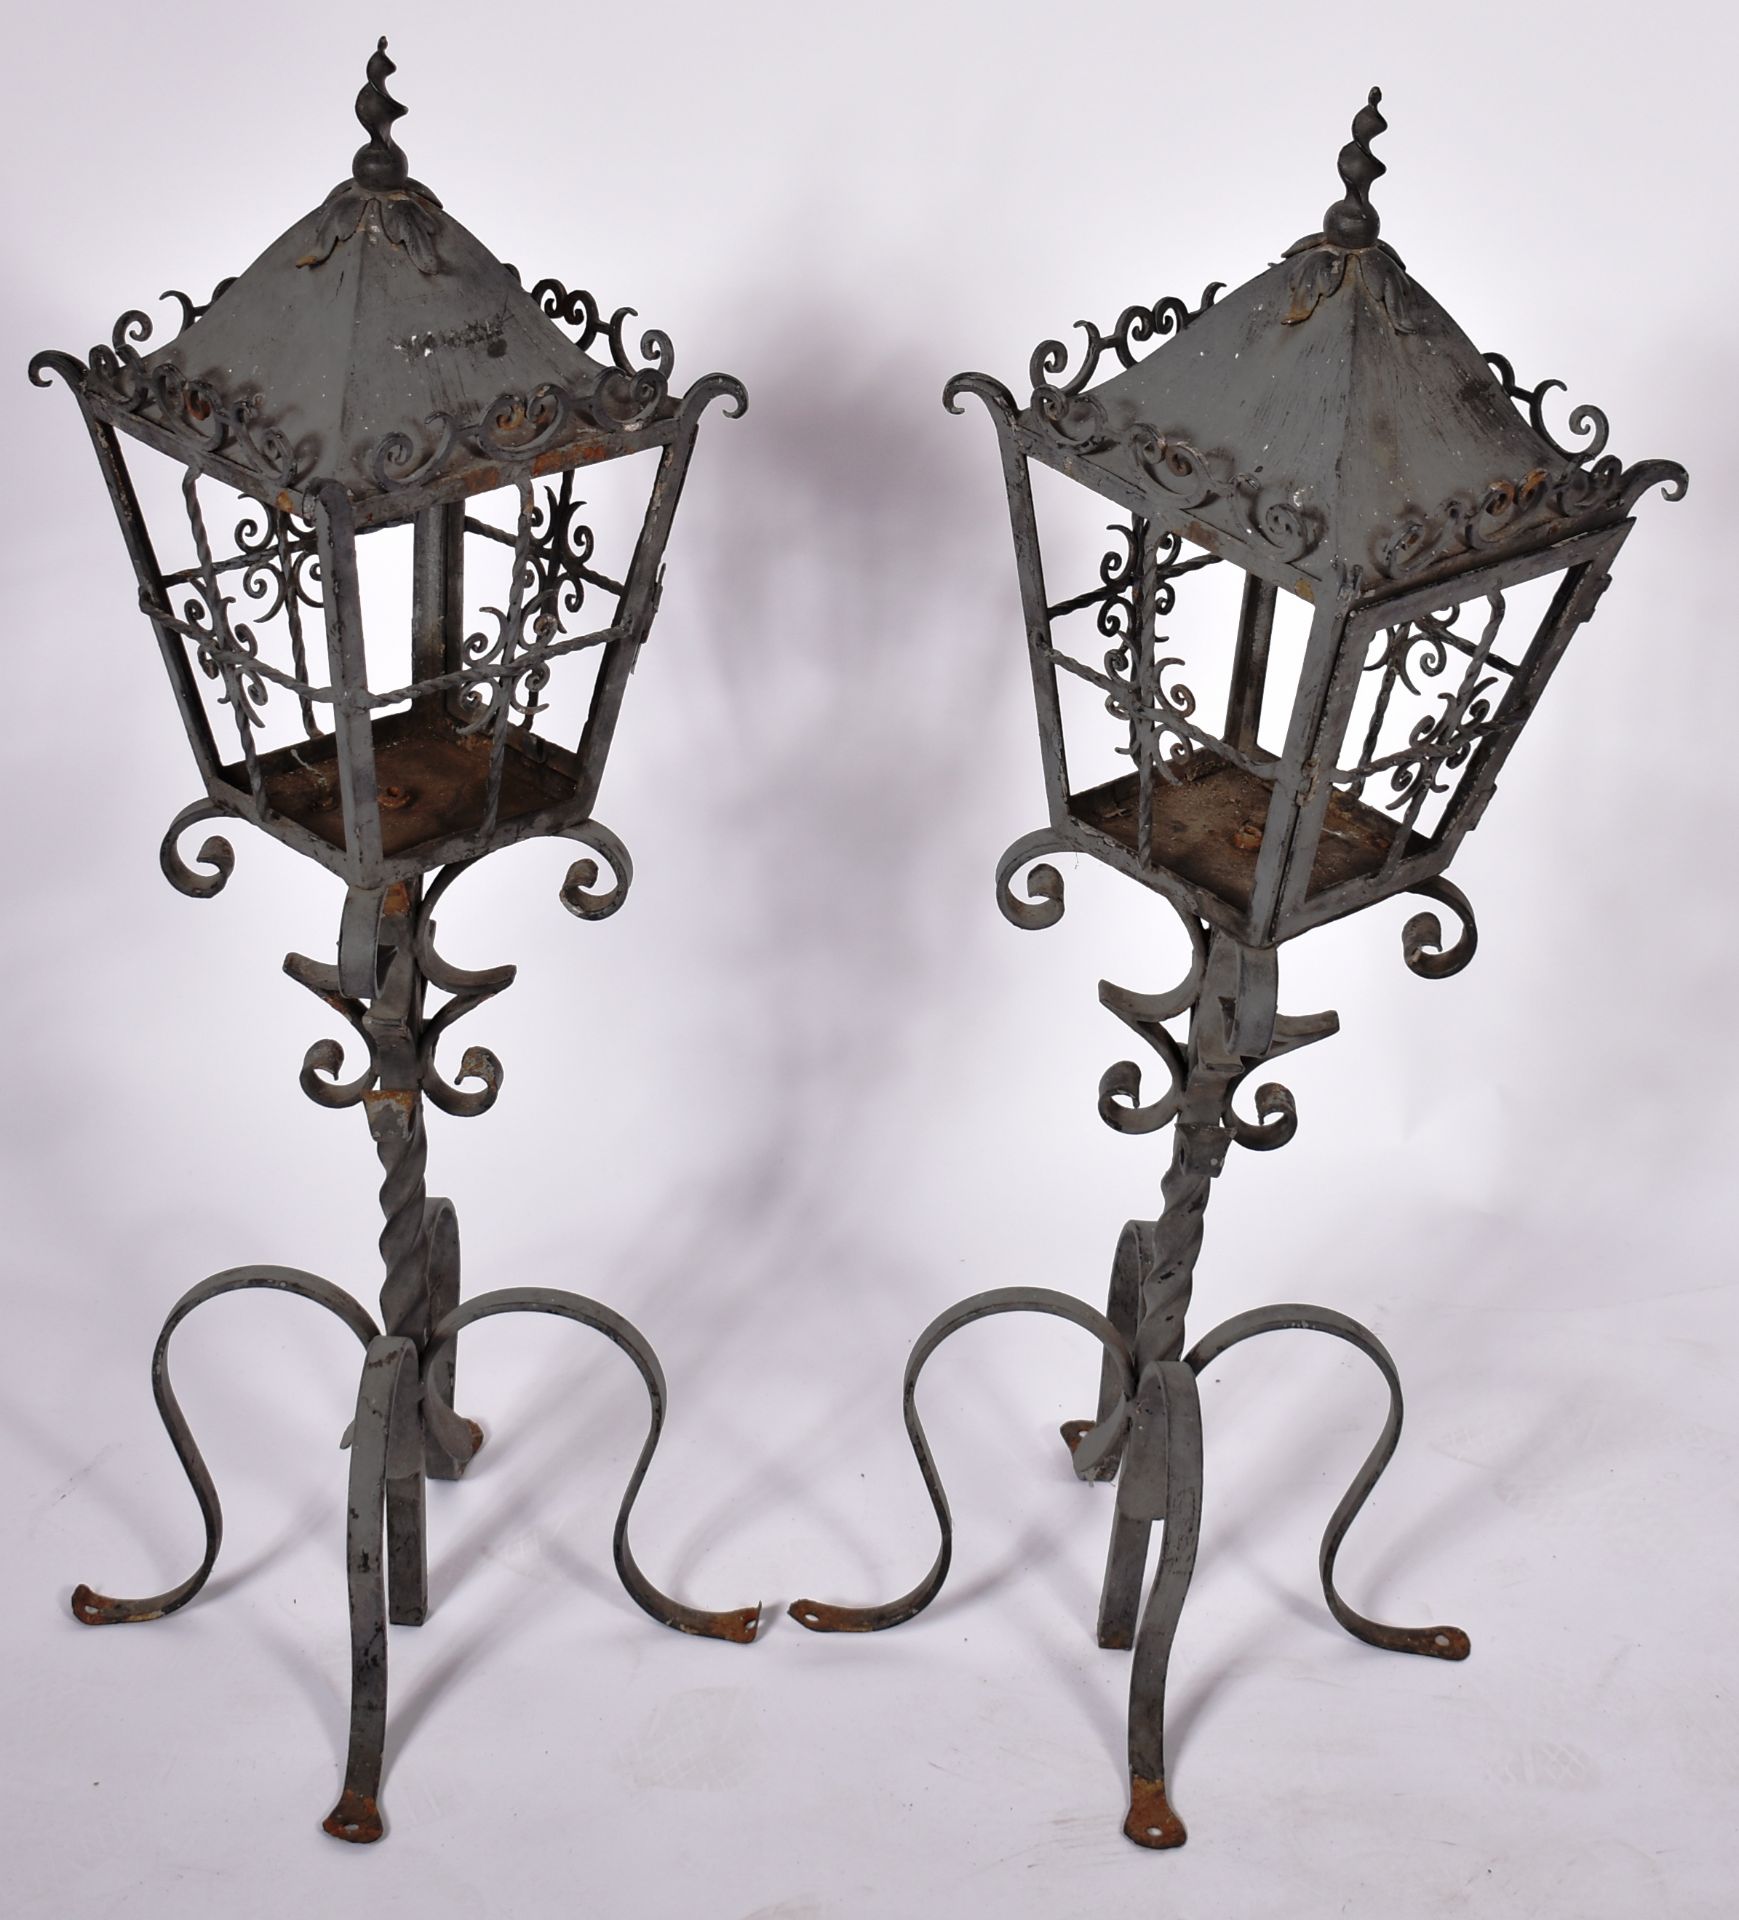 MATCHING PAIR OF VICTORIAN CAST IRON POST LANTERNS - Image 2 of 7